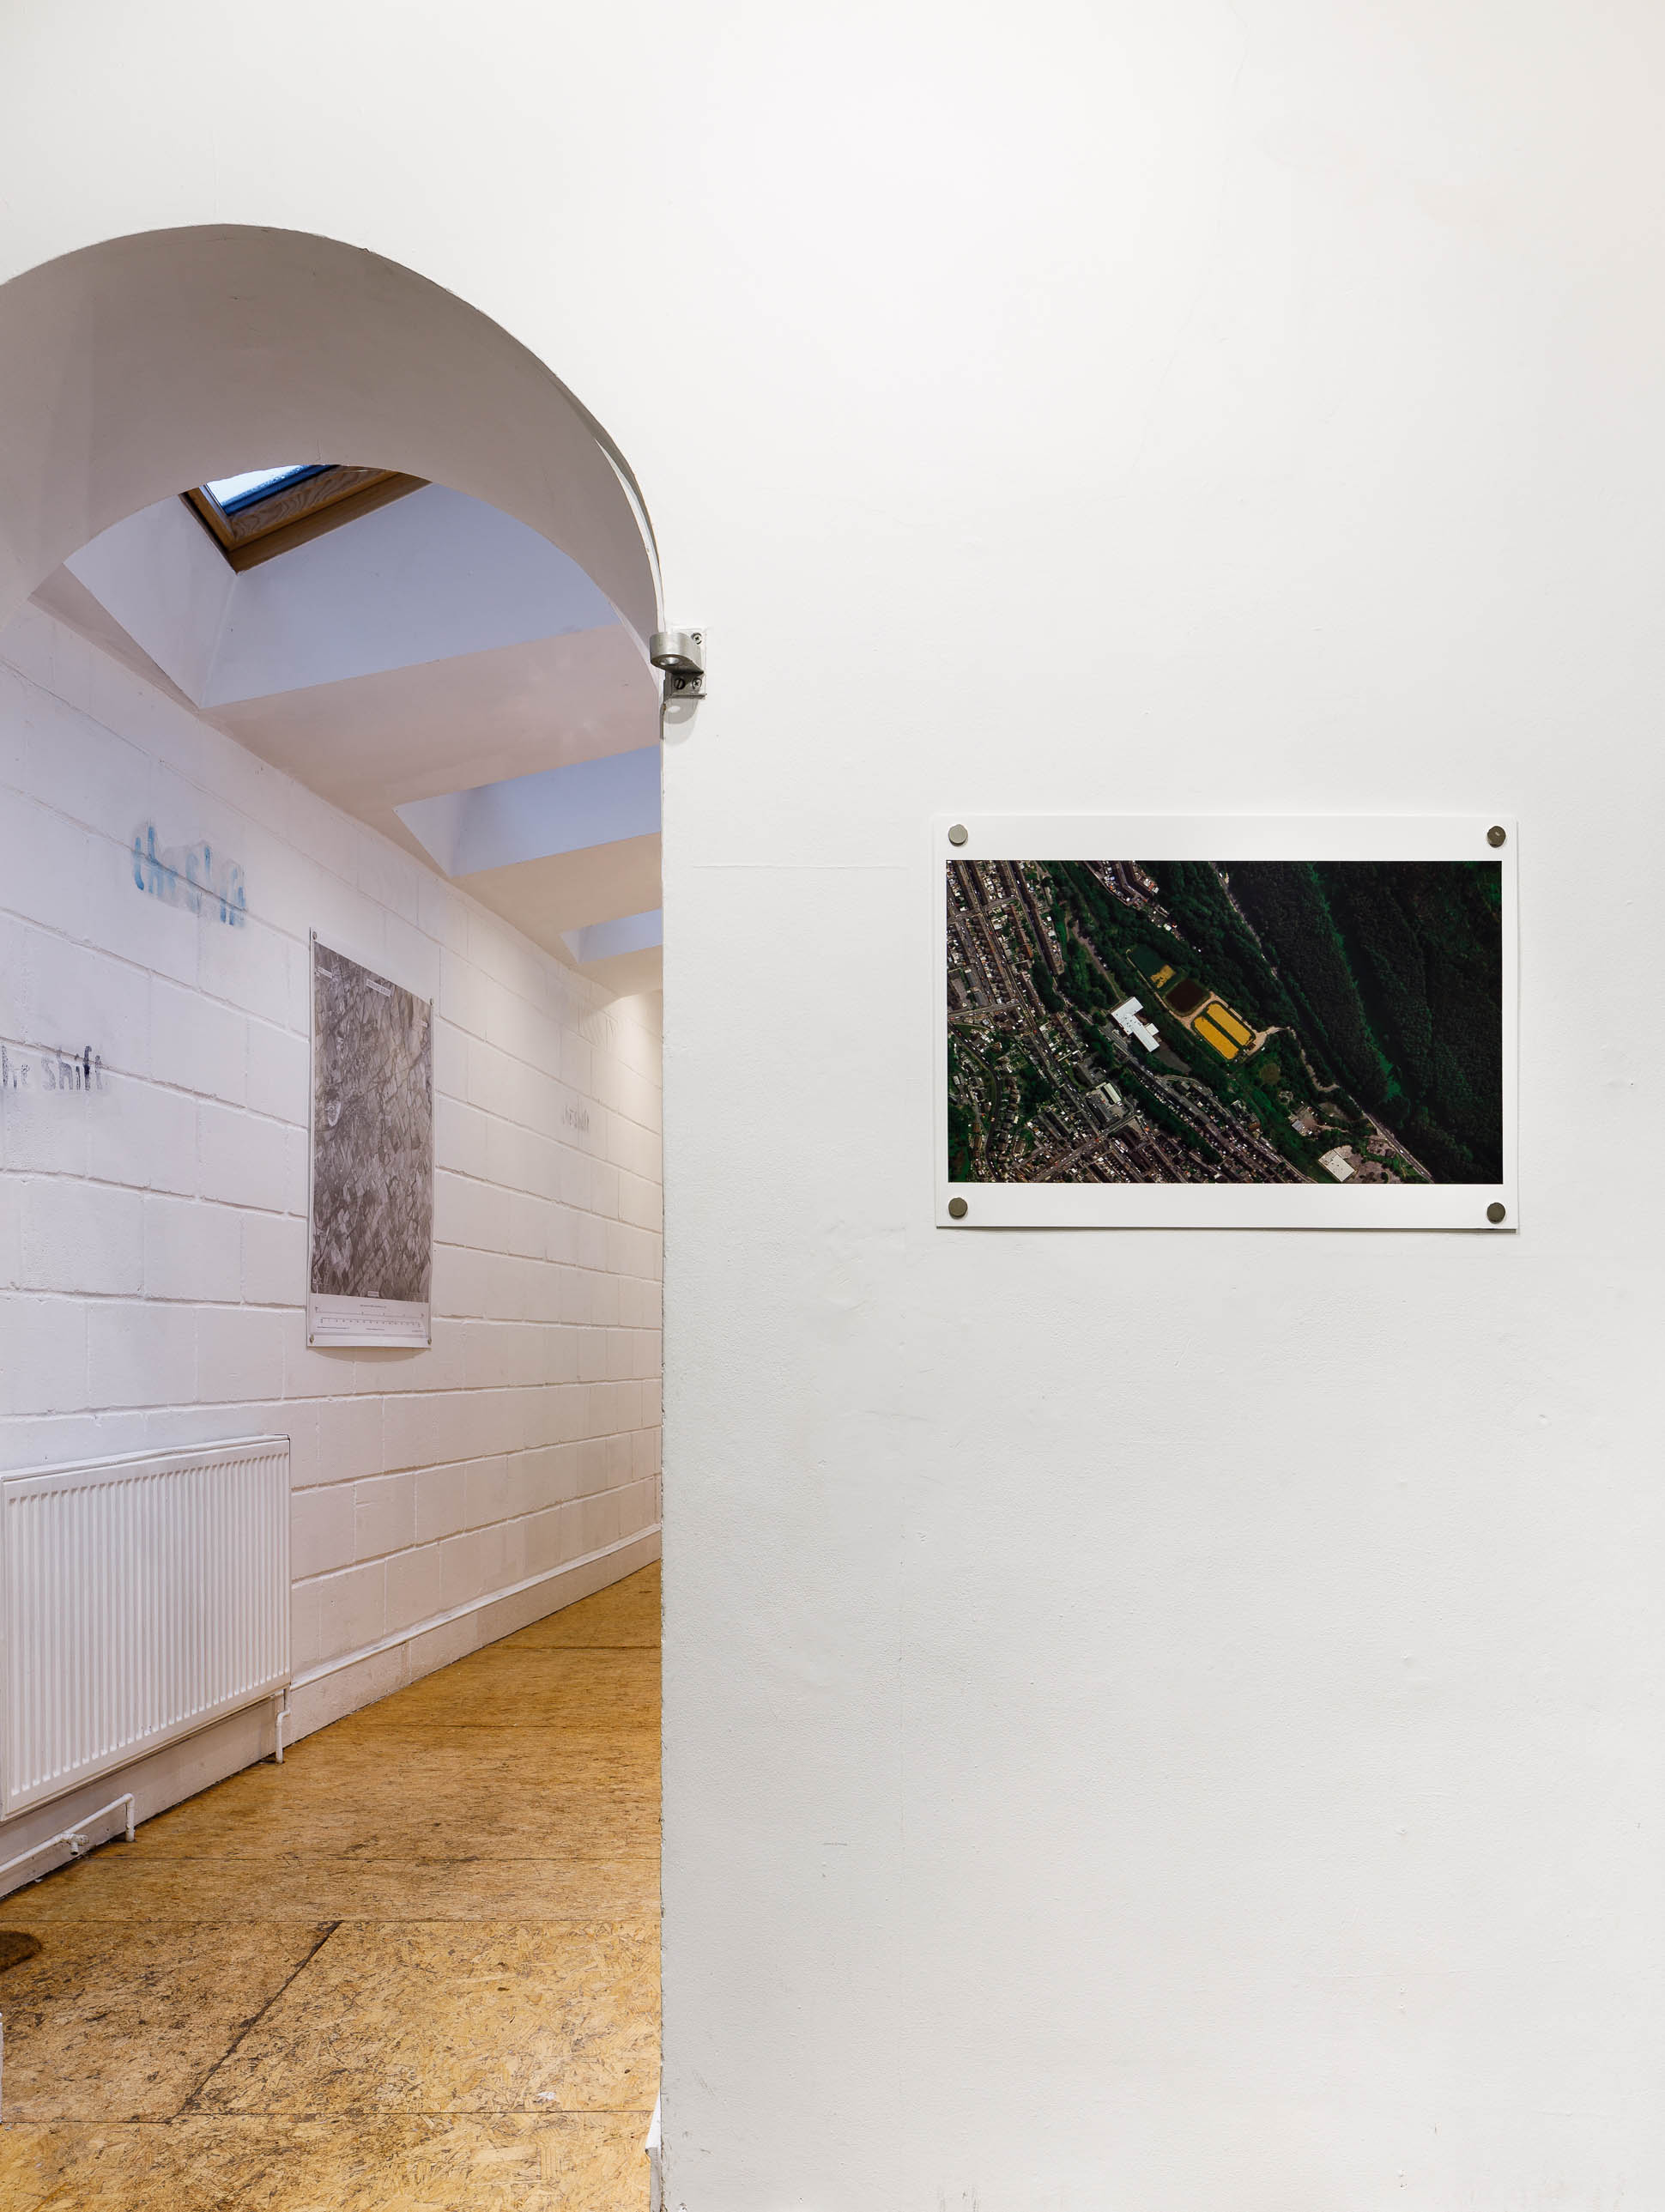  (Aerial Landscapes Book Launch 11)